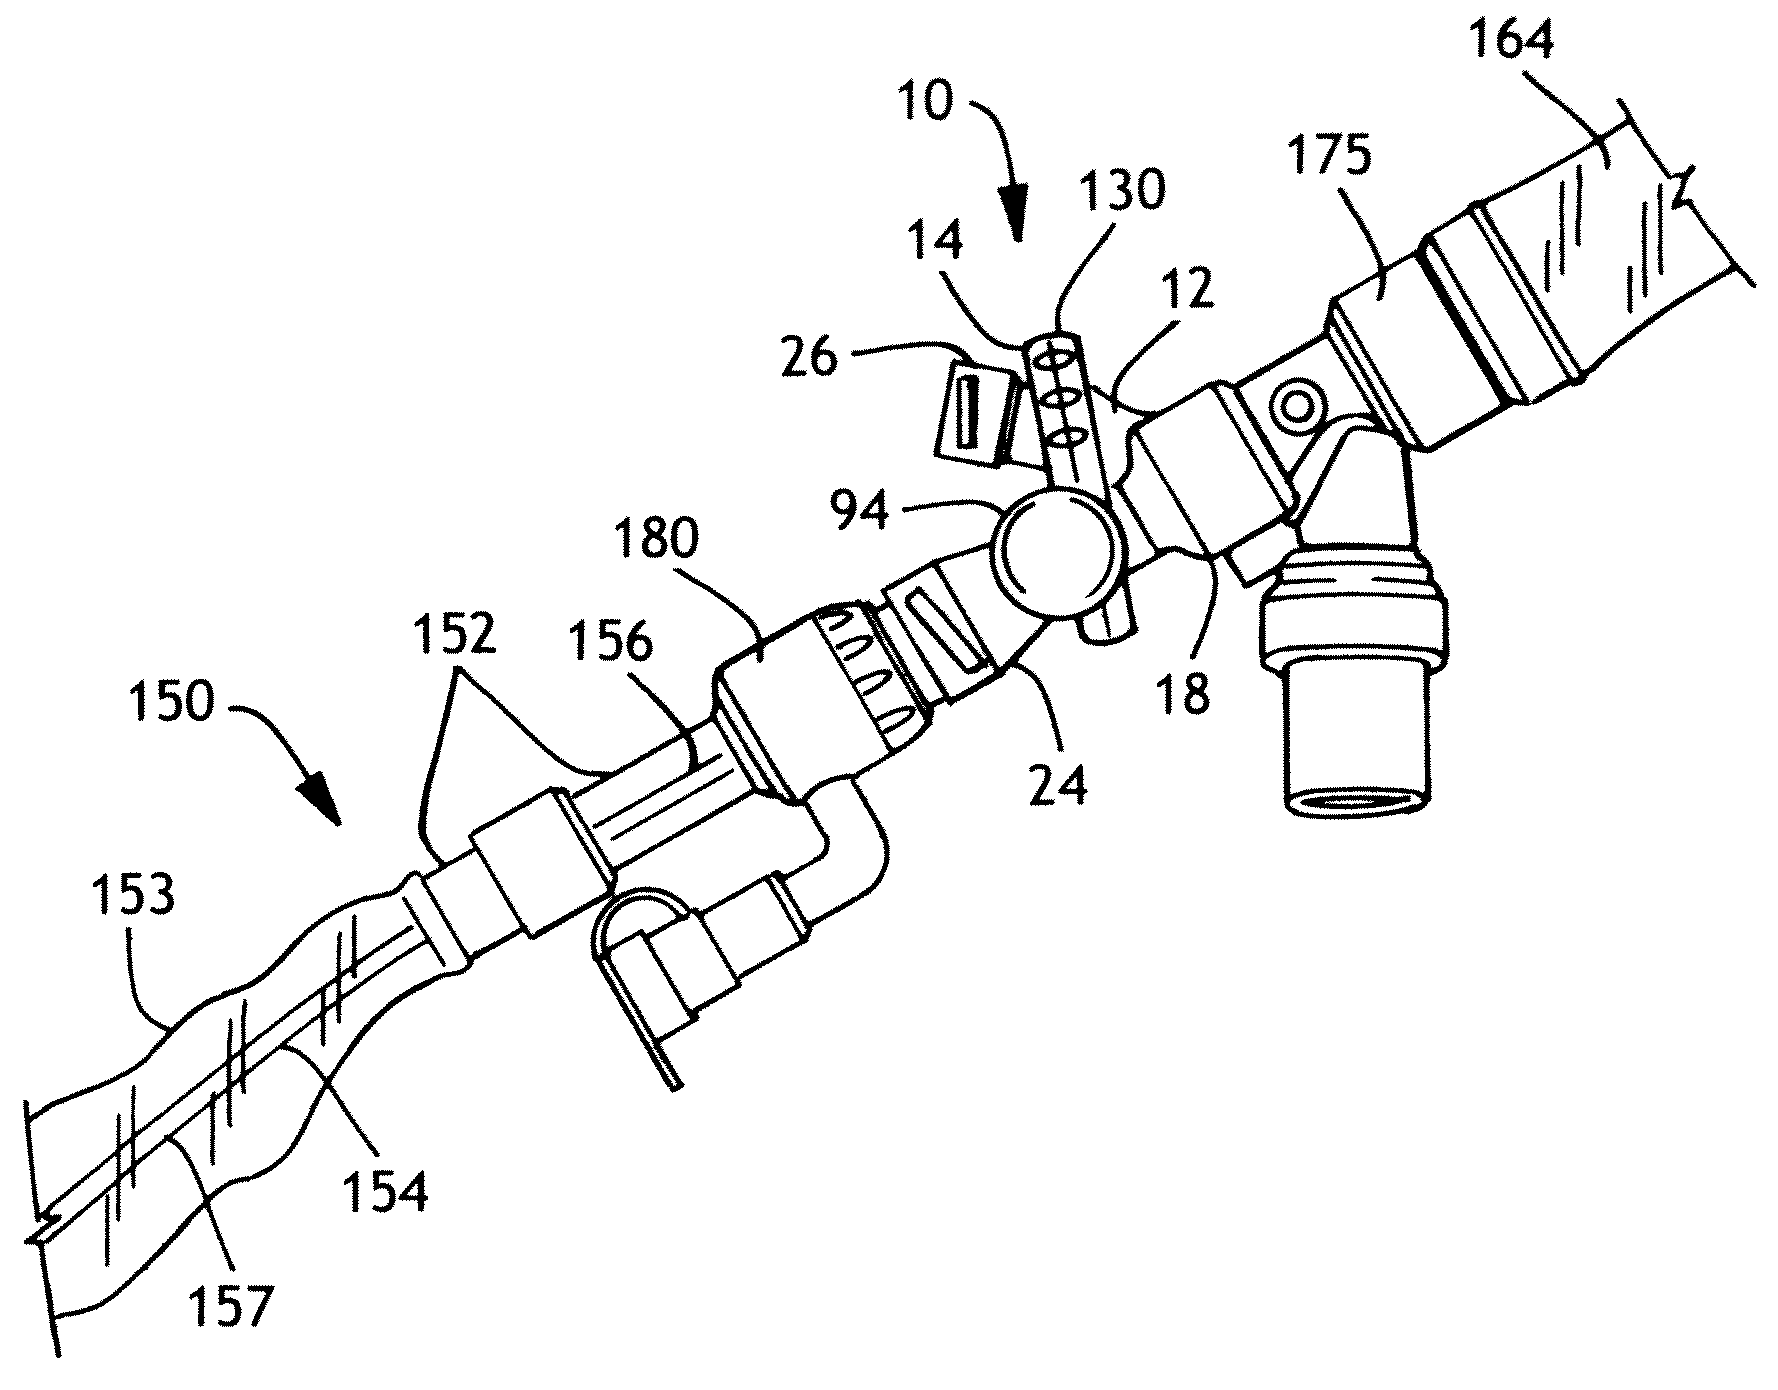 Respiratory Access Port Assembly With Push Button Lock and Method of Use